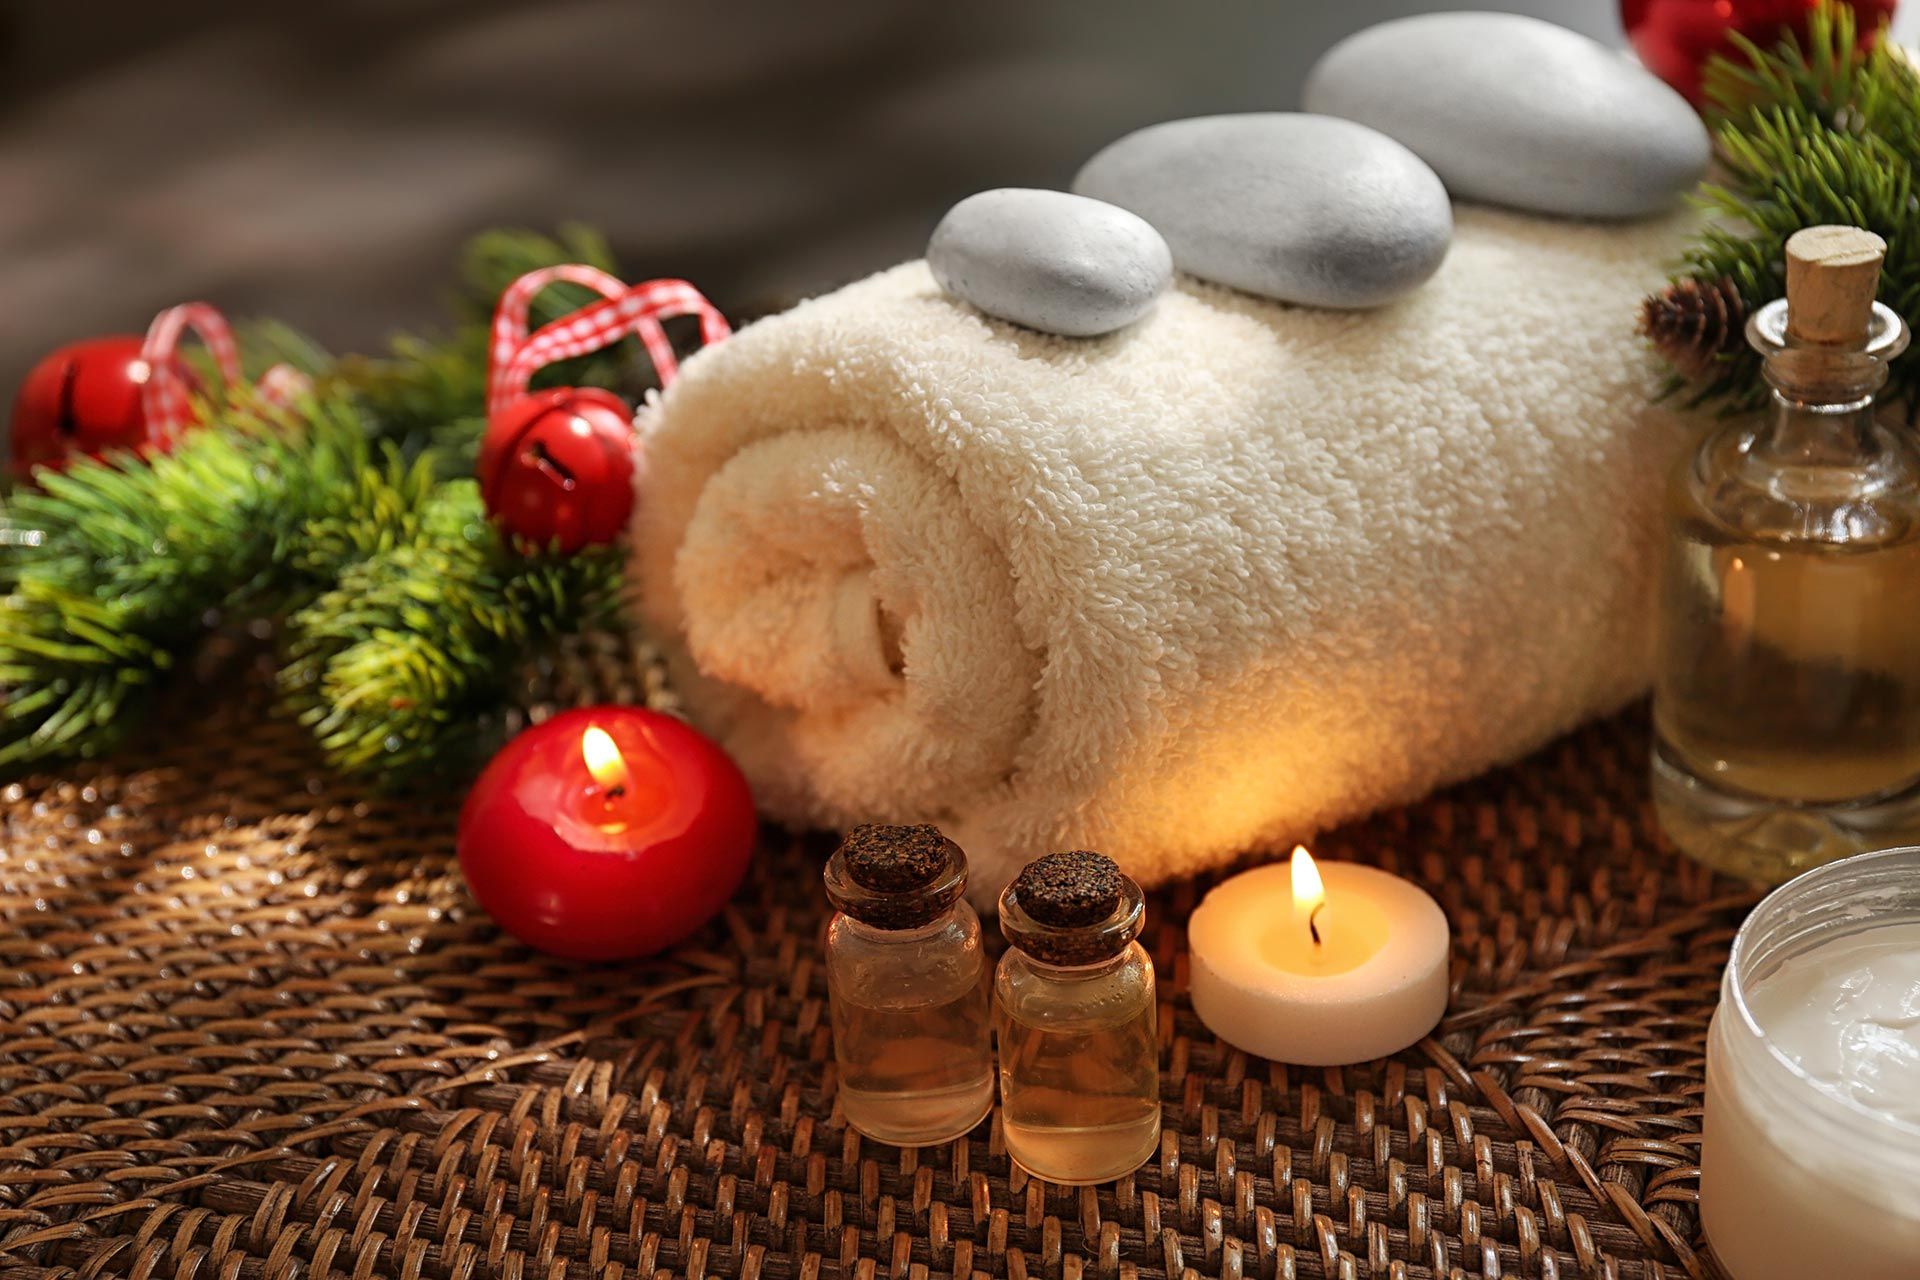 Aristocracy Salon & Day Spa offers Christmas packages for spa, massage, and salon services.